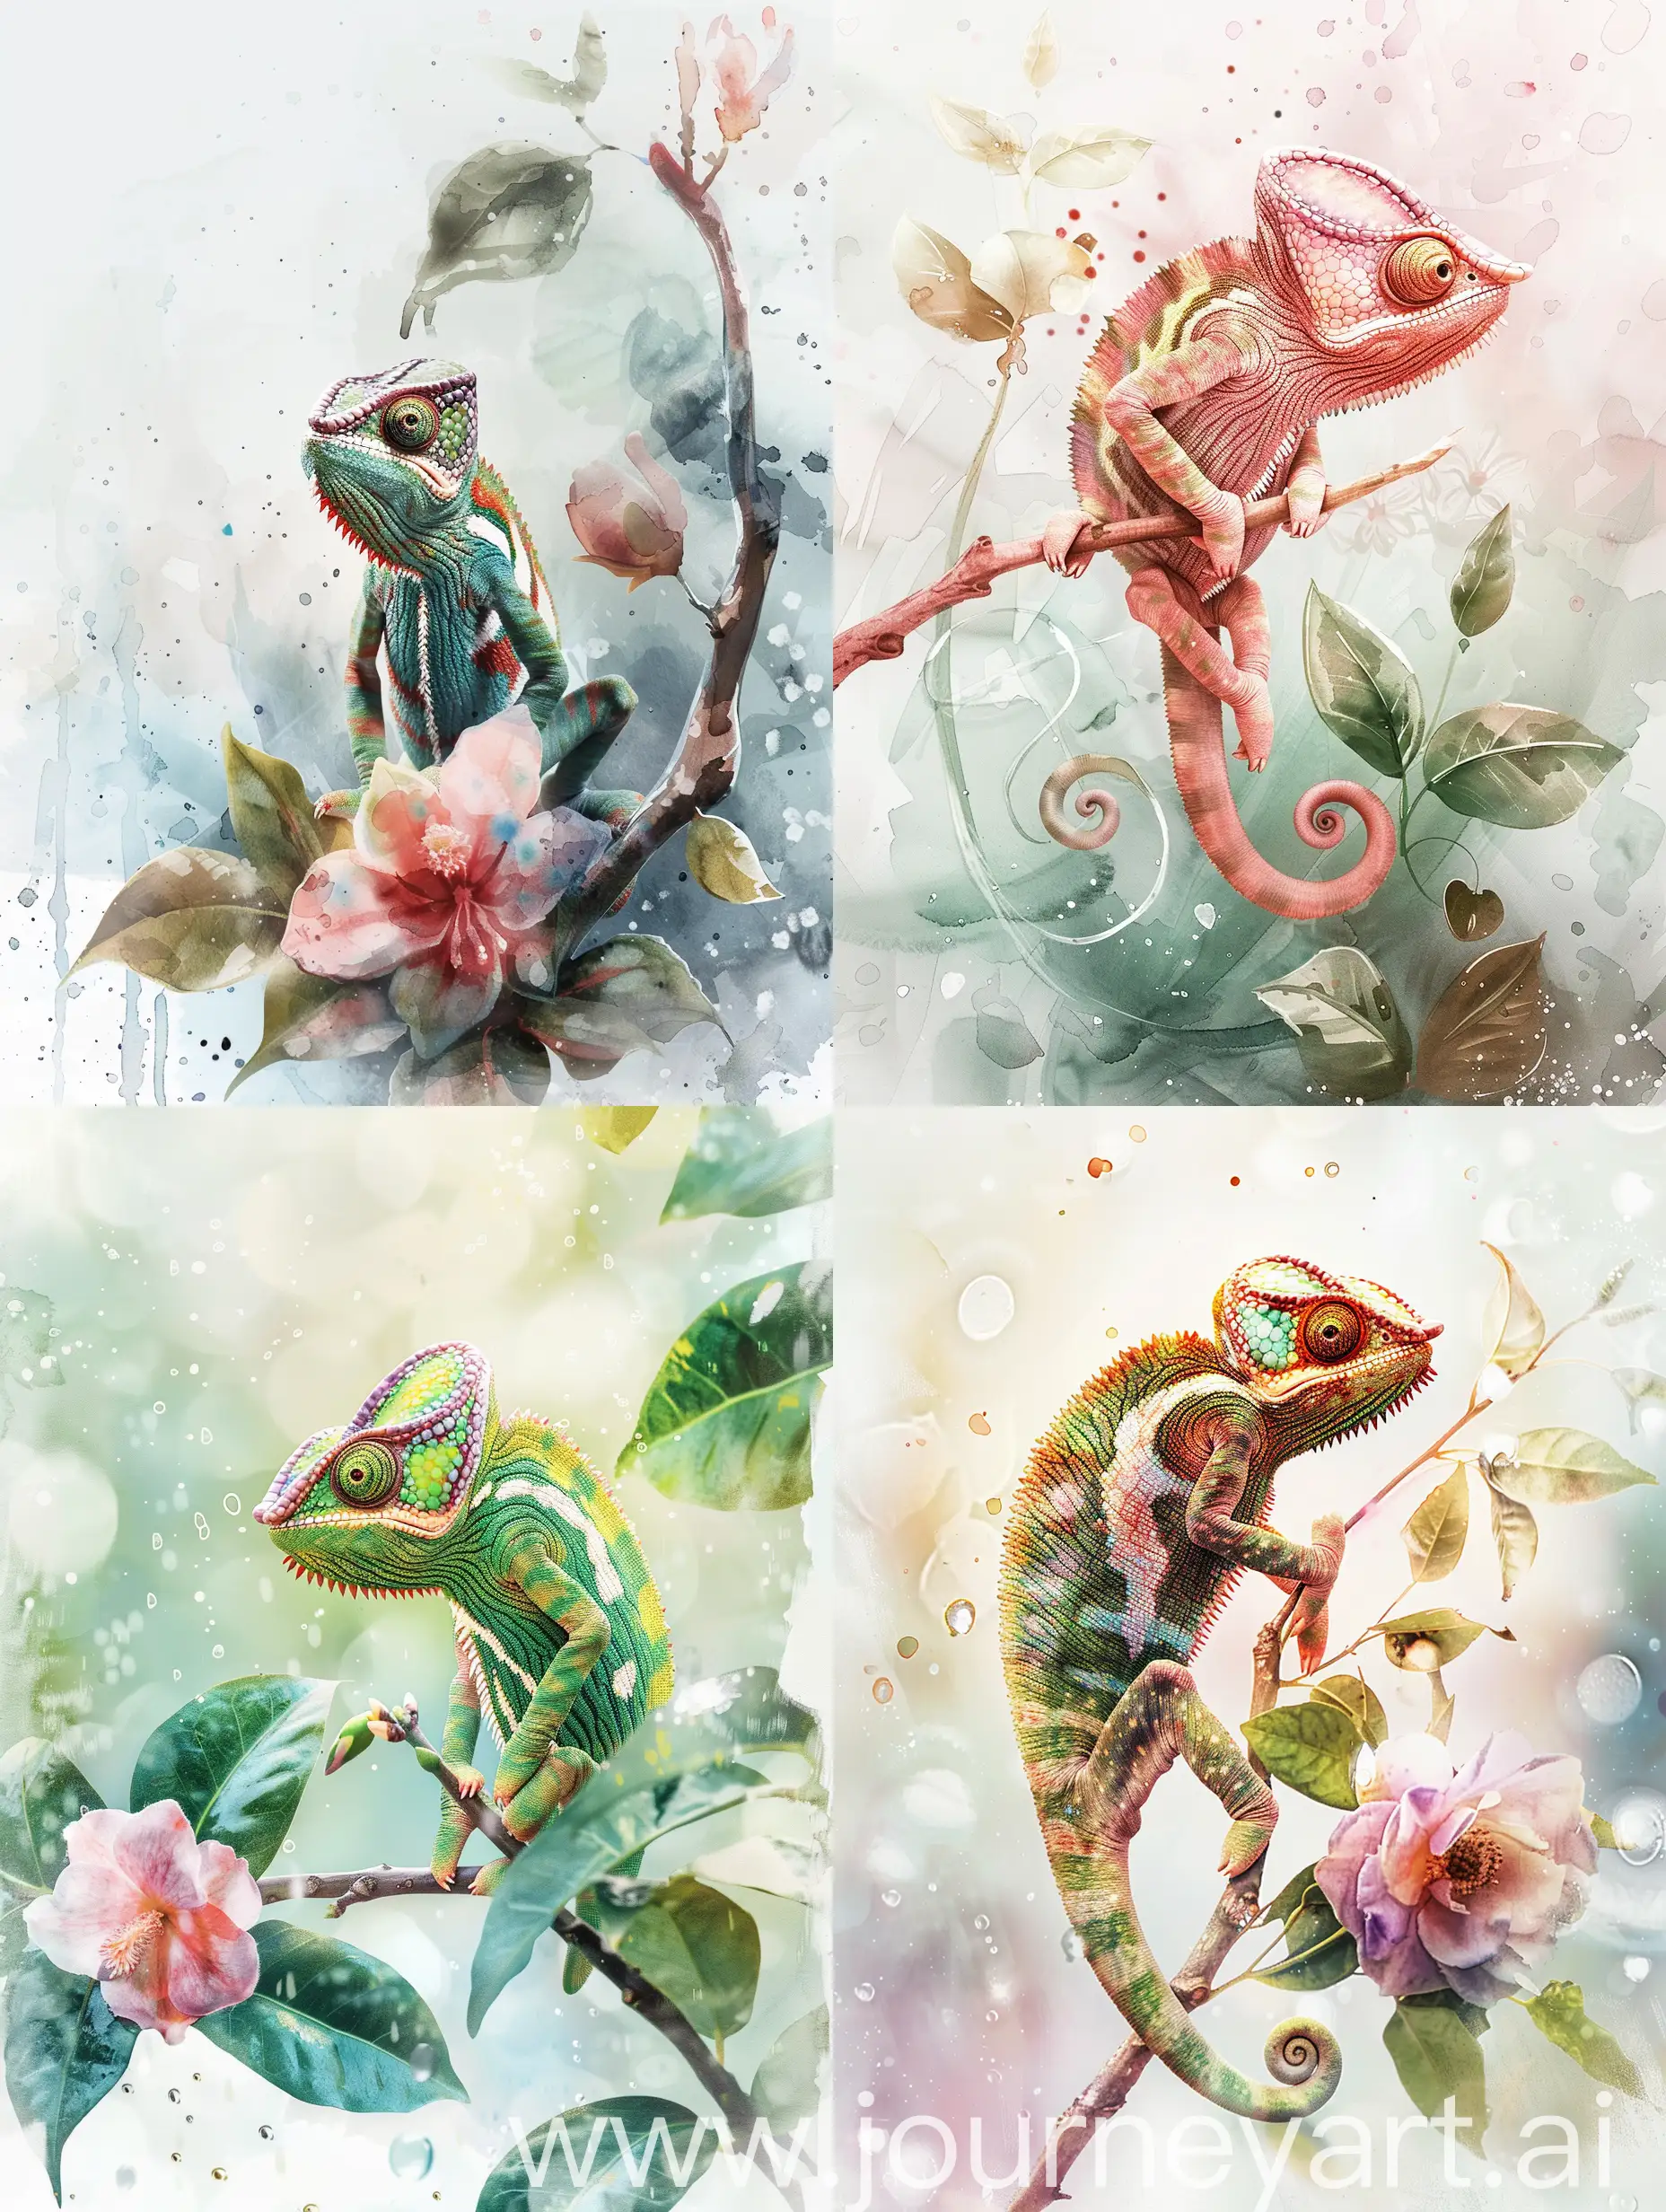 Colorful-Chameleon-on-Branch-with-Watercolor-Surroundings